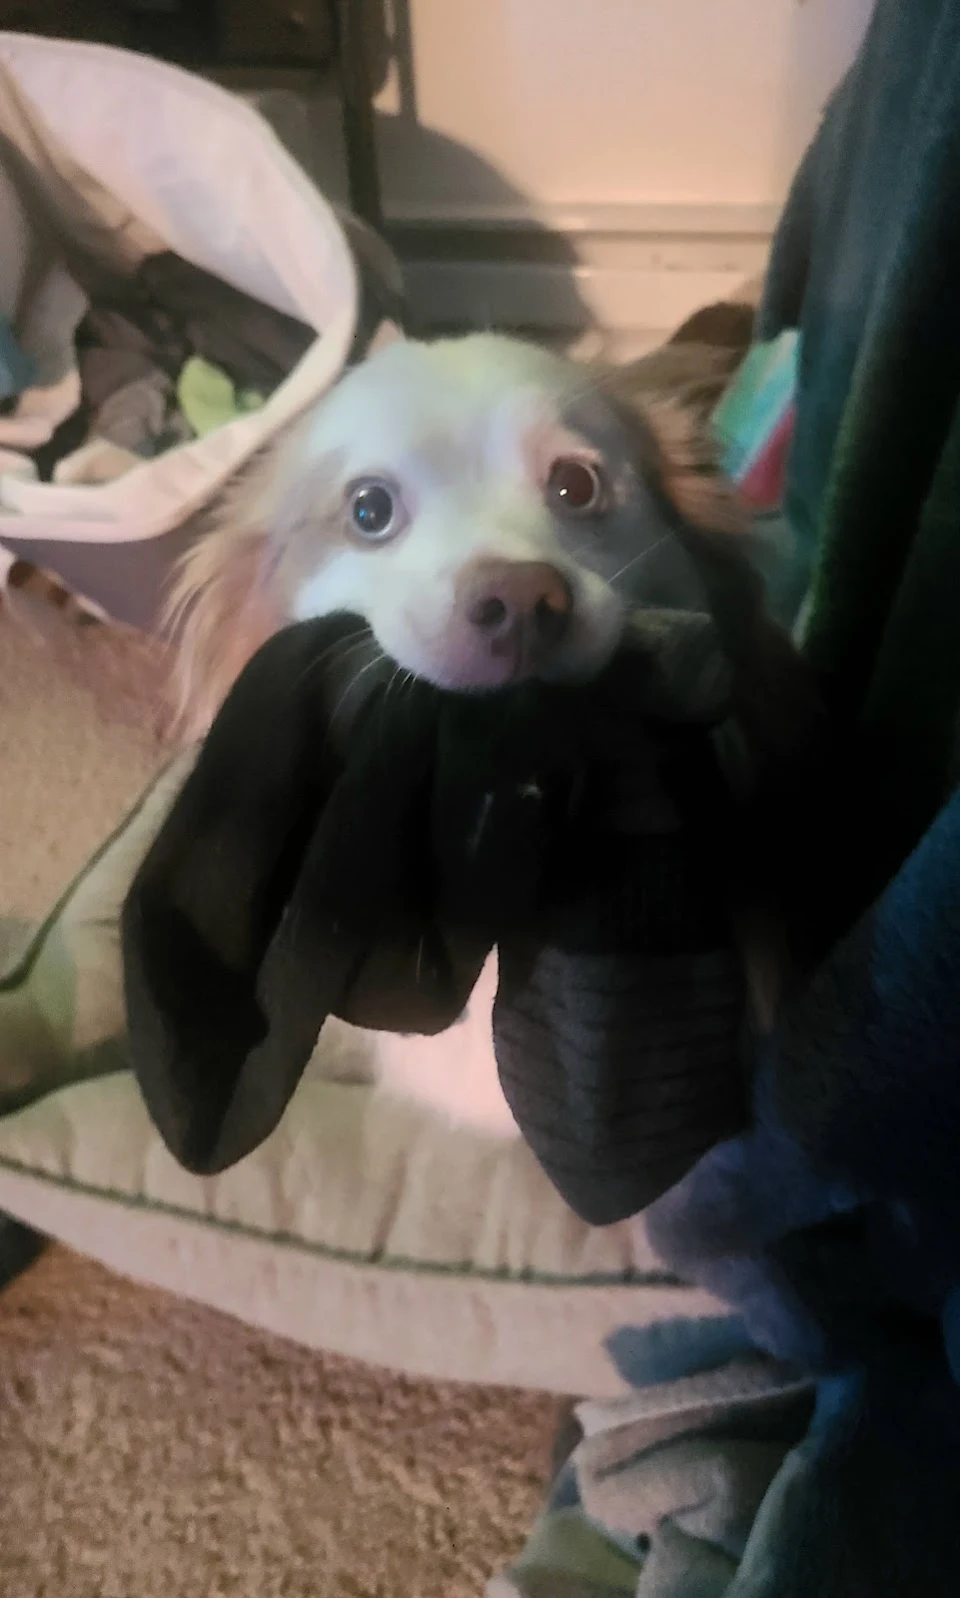 my dog loves to steal every sock he can find and play keepaway. Makes this face every time